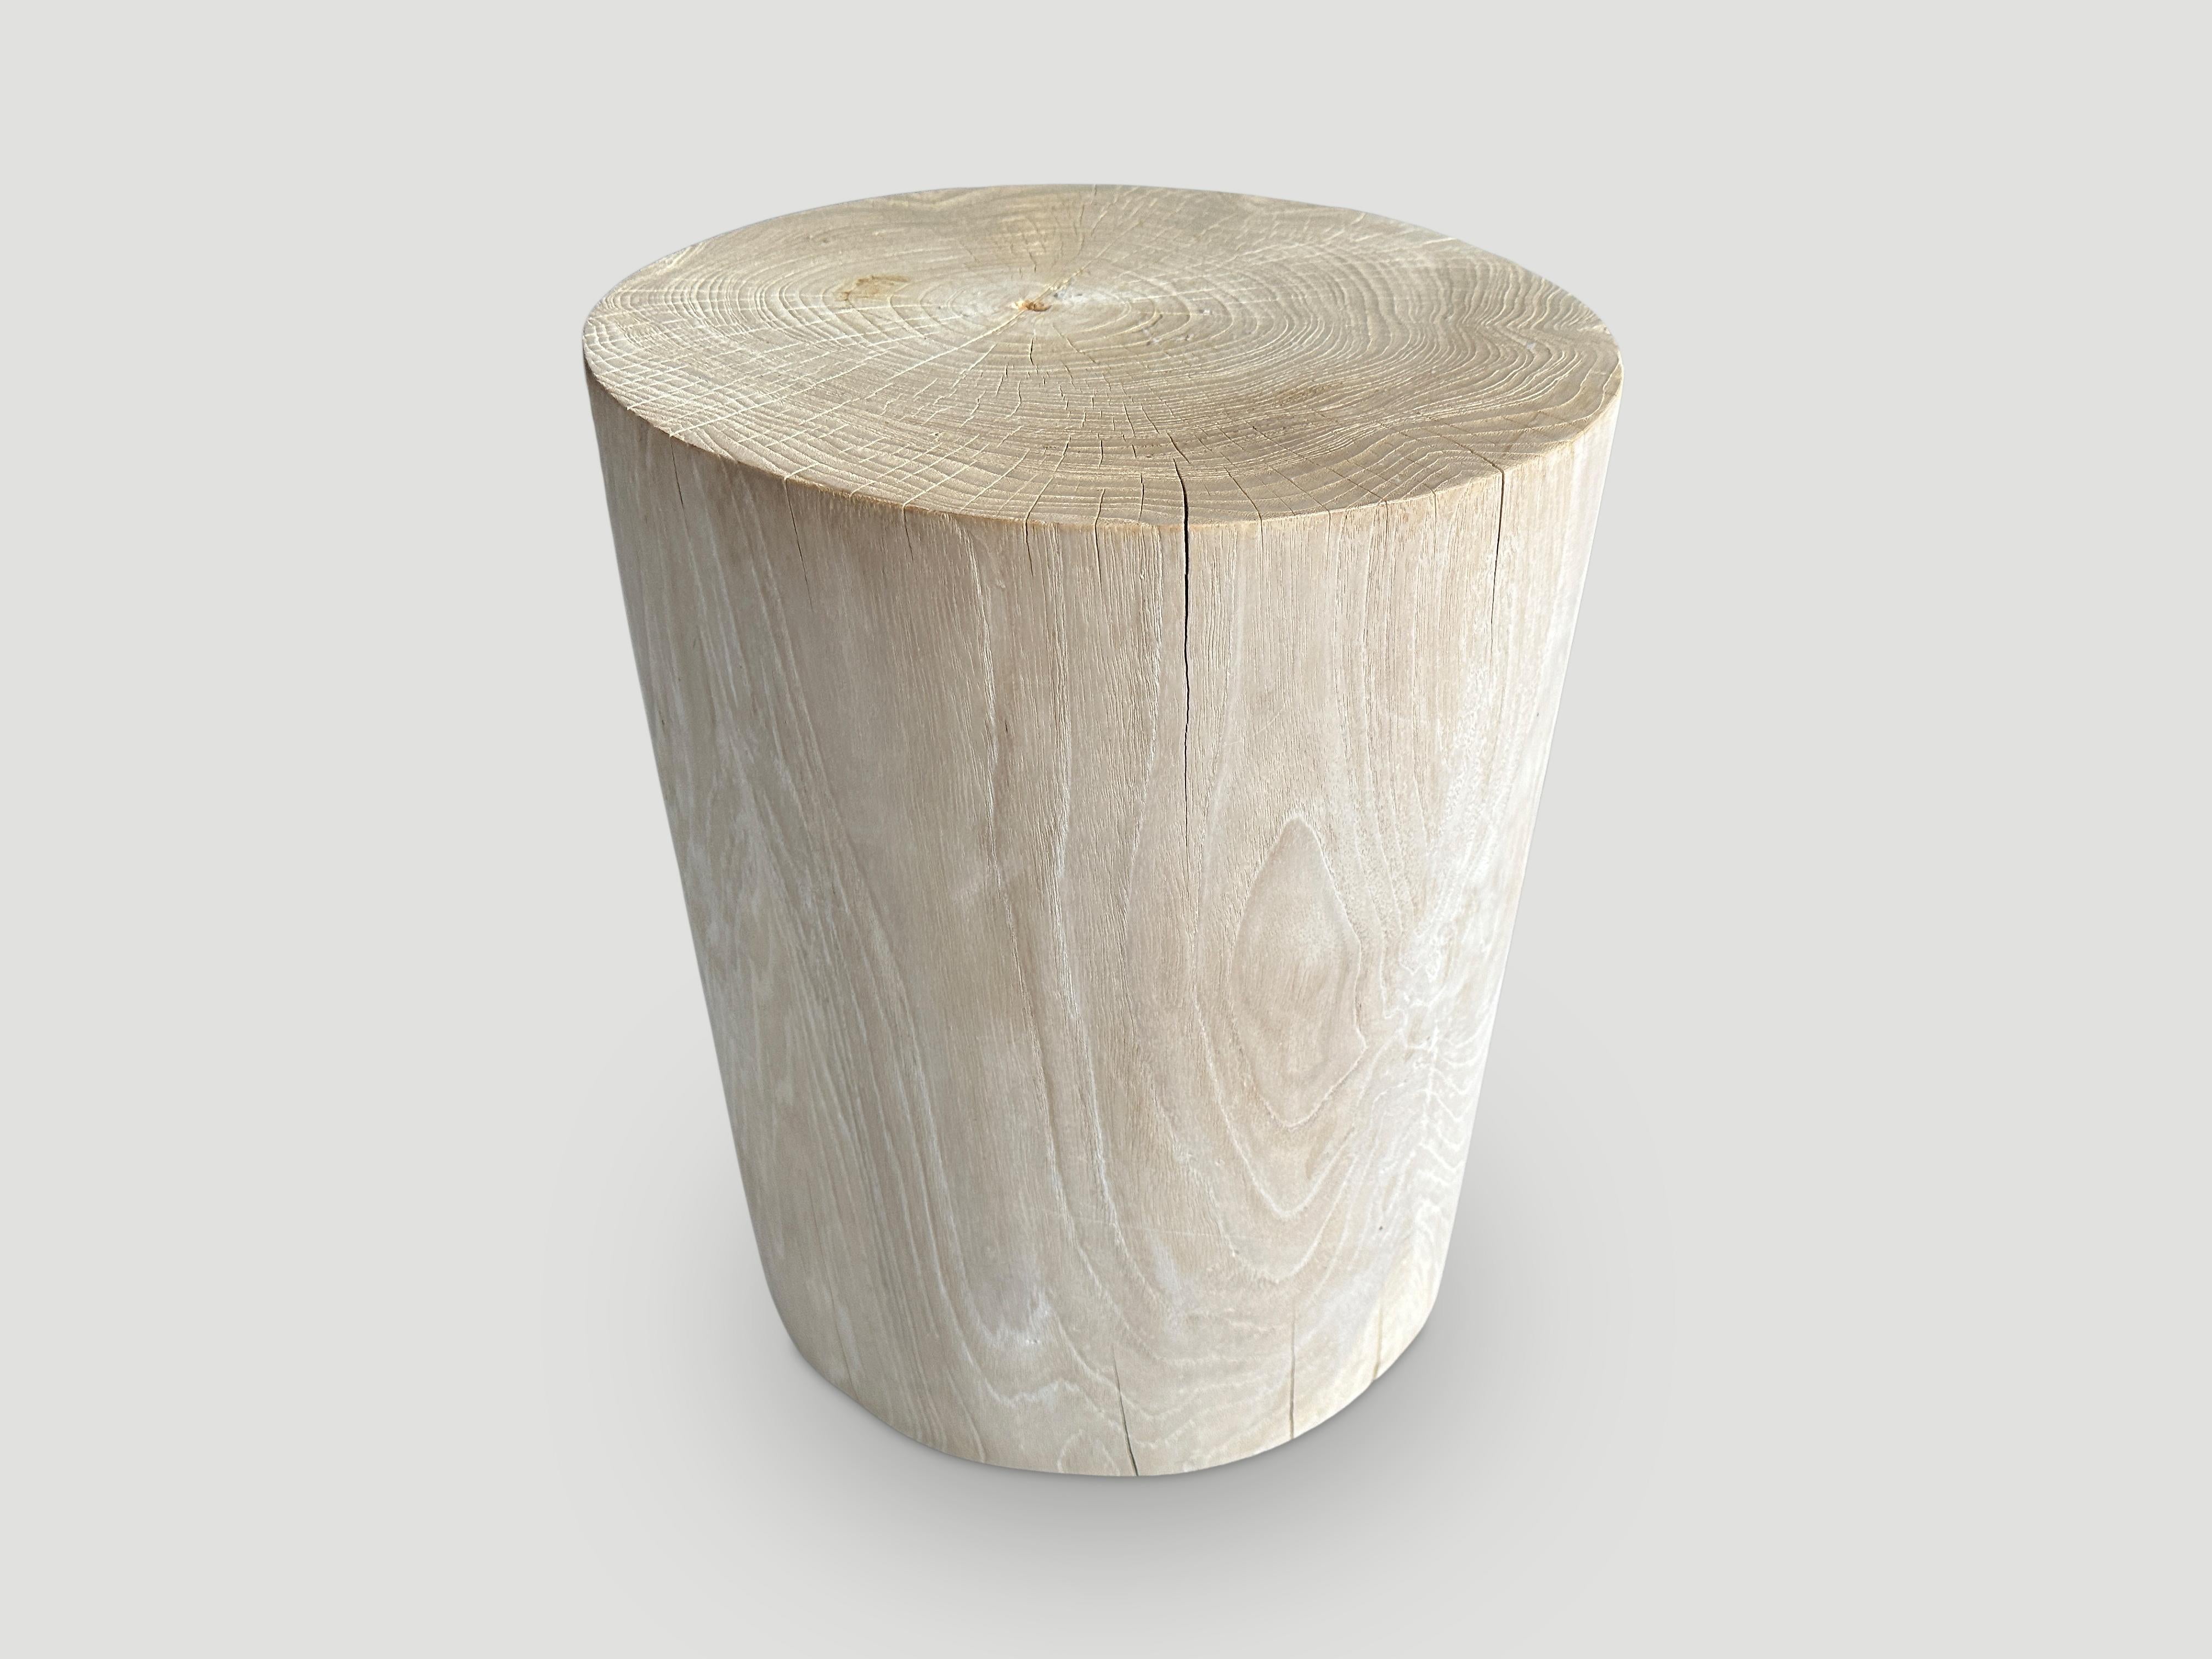 Reclaimed teak wood cylinder side table or stool. Bleached and carved into a Minimalist cylinder whilst respecting the natural organic wood. Also available charred. We have a collection. 

The St. Barts Collection features an exciting line of